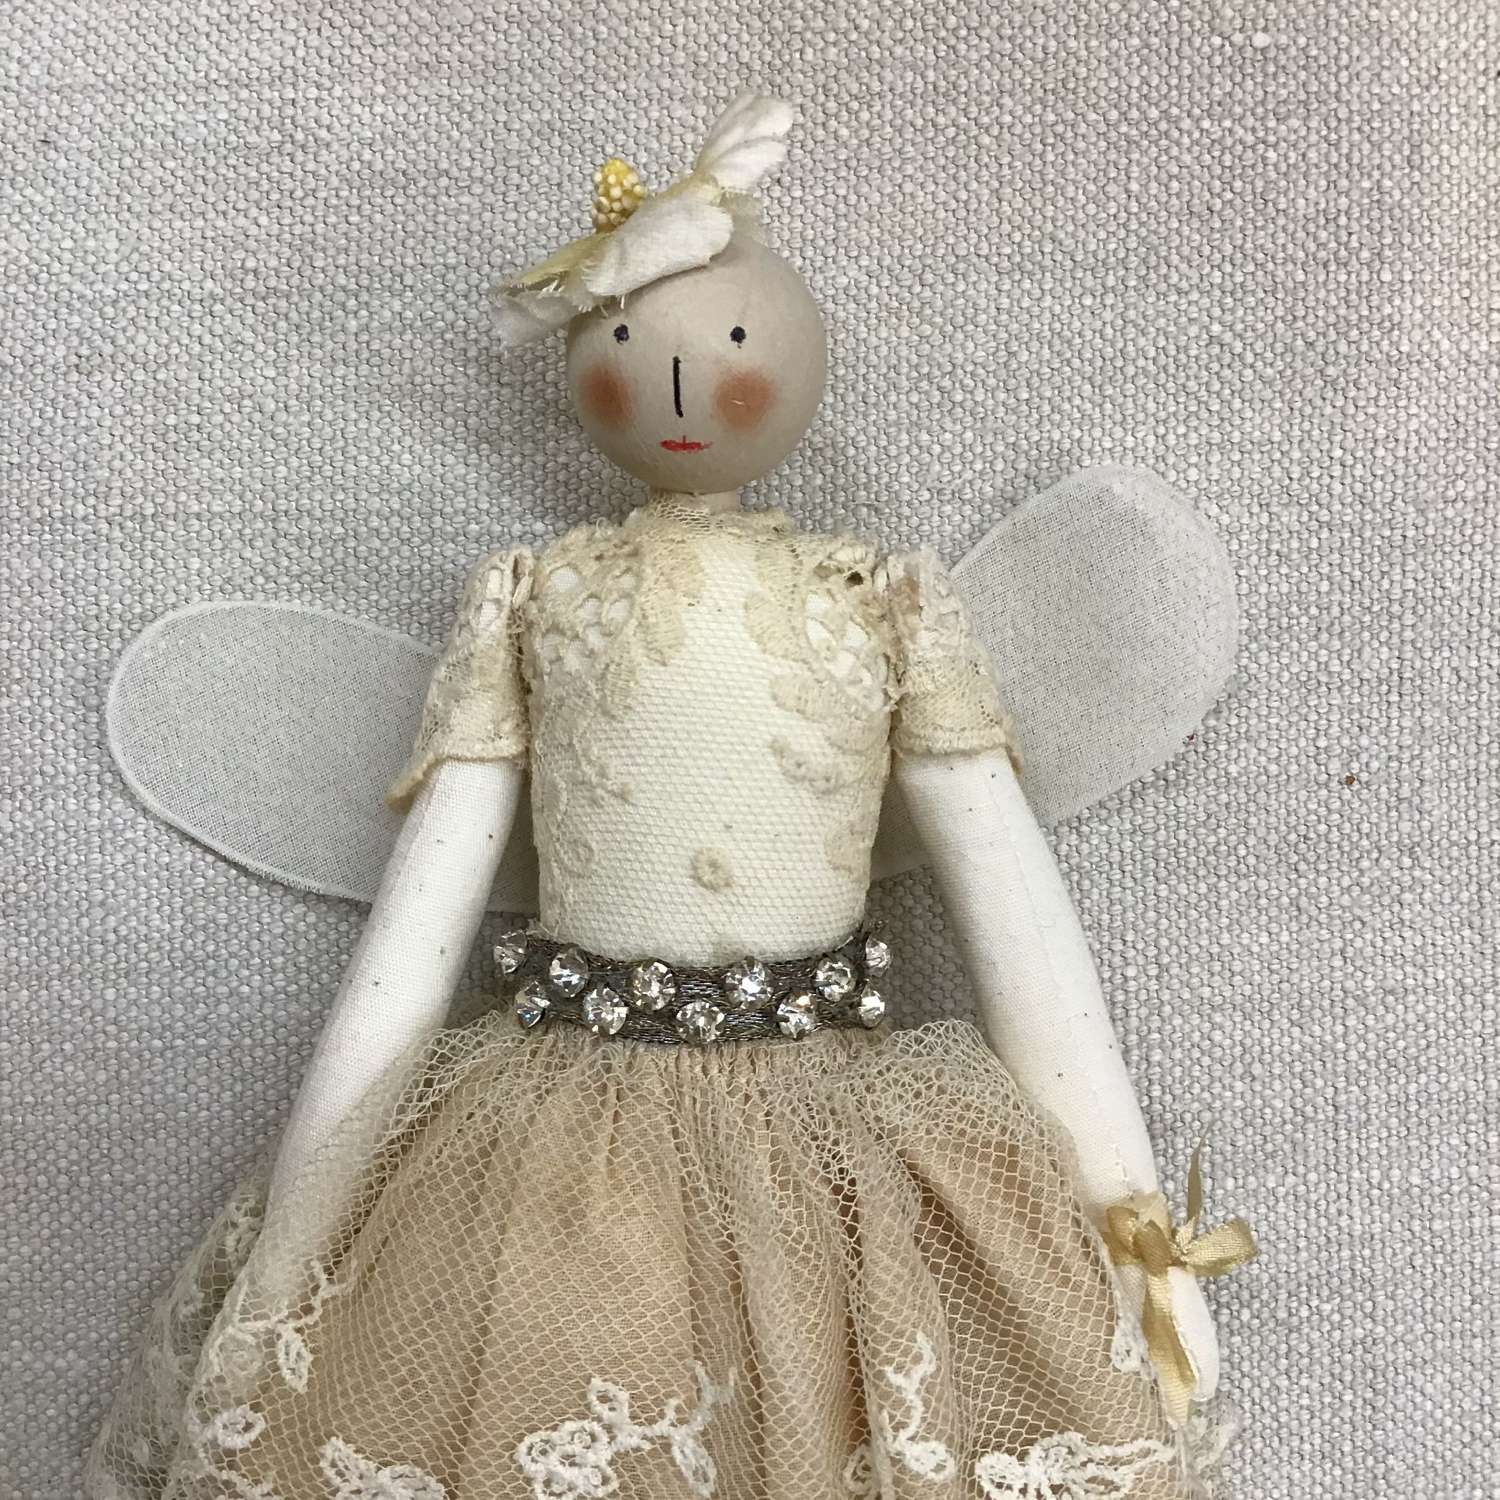 Handcrafted cloth fairy doll with vintage clothing